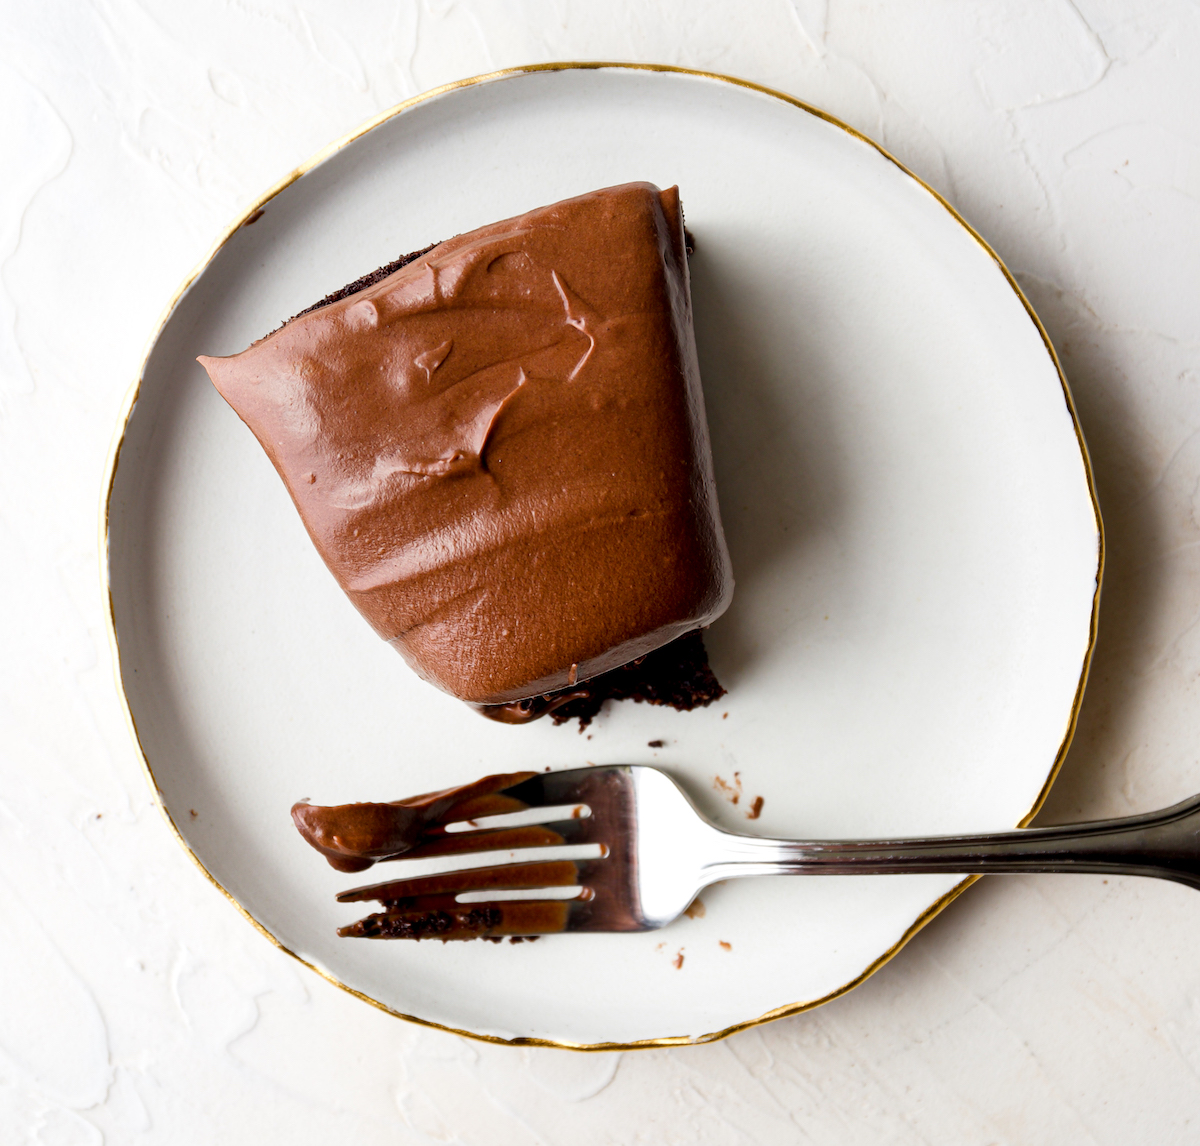 A slice of chocolate cake with a bite out of it.